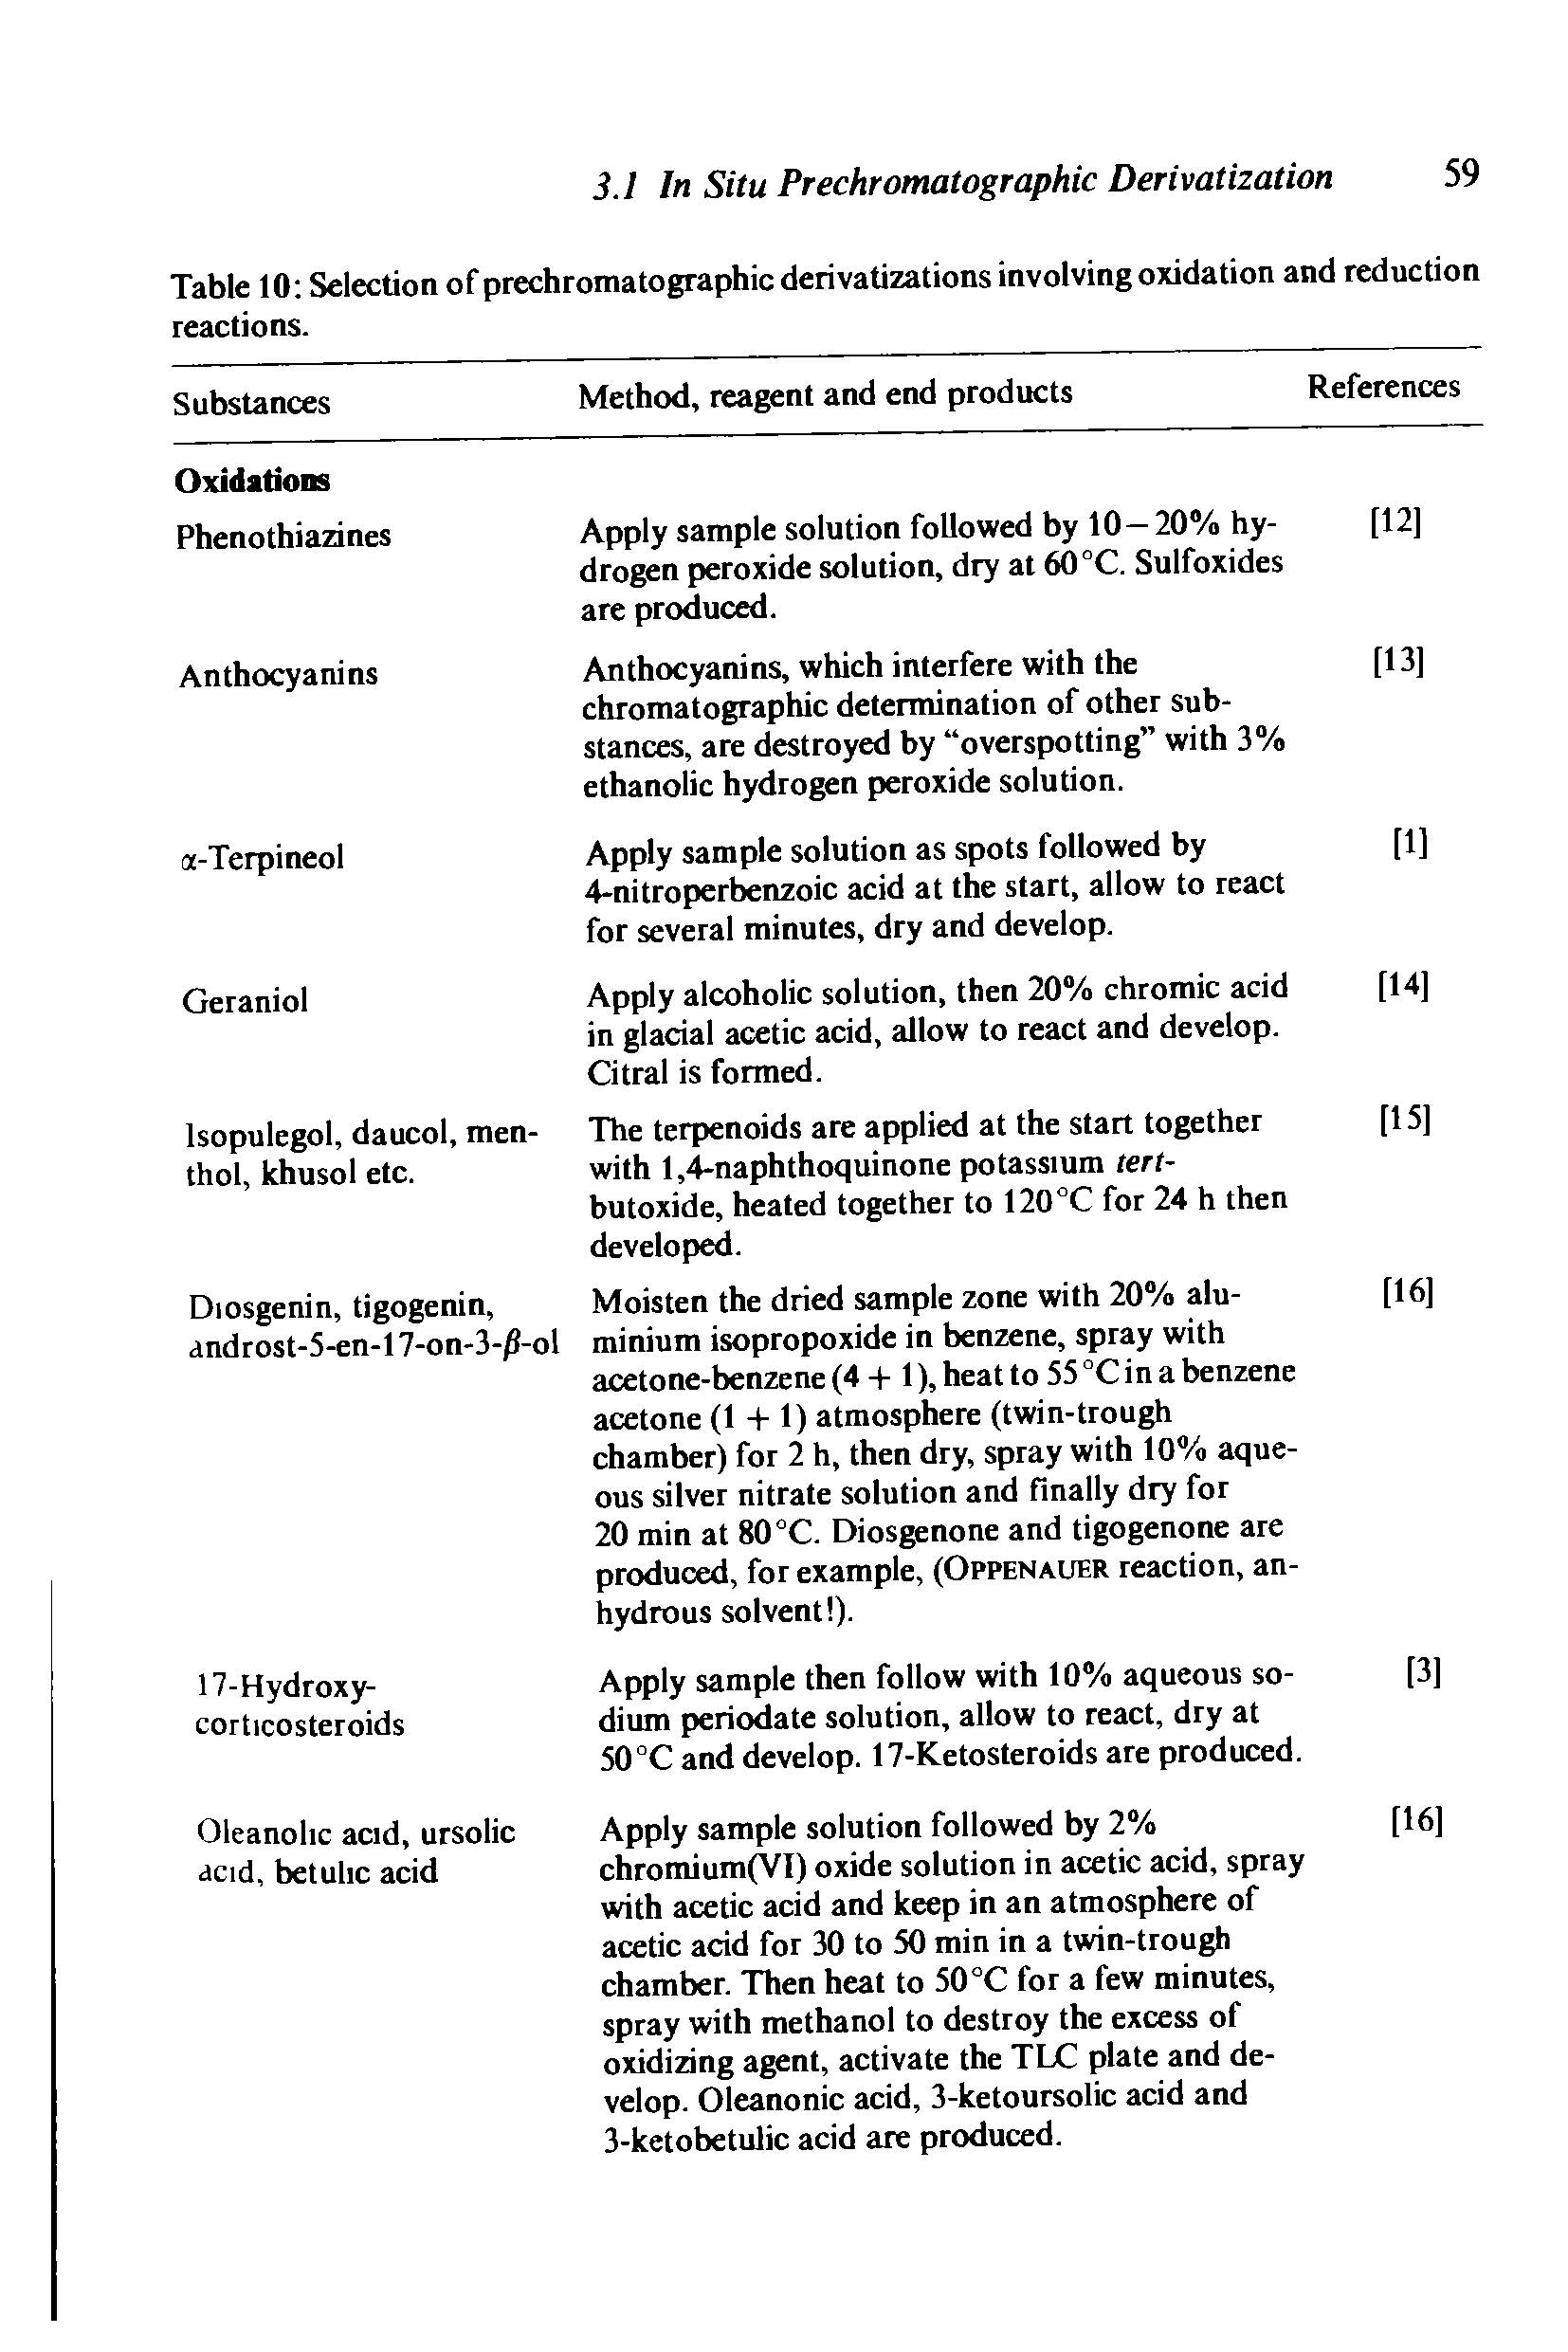 Table 10 Selection of prechromatographic derivatizations involving oxidation and reduction reactions.